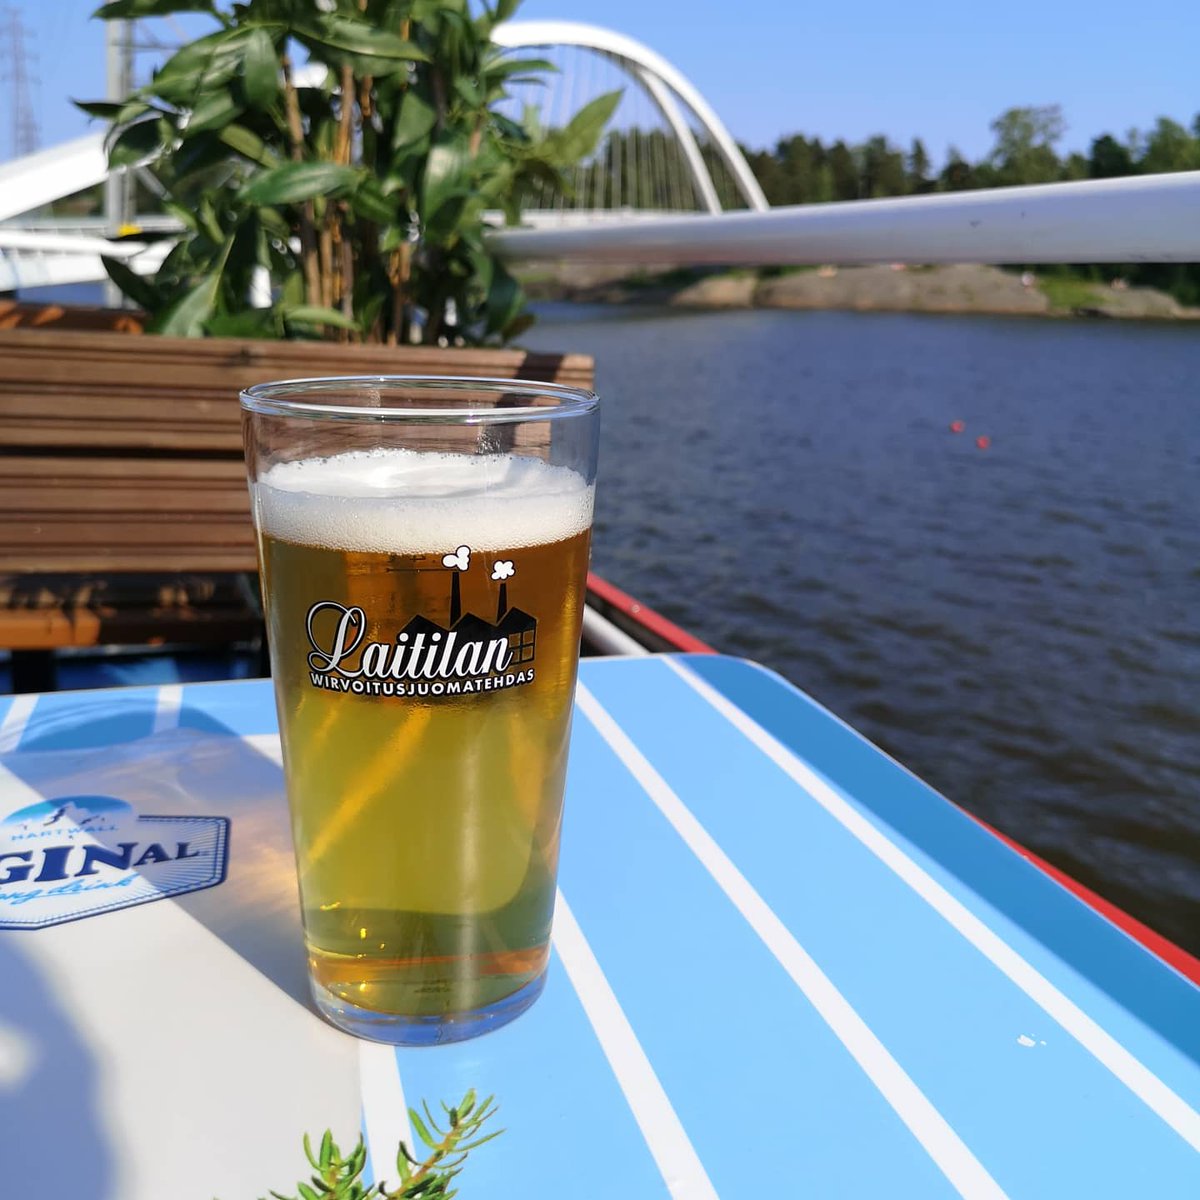 Went on a walk and enjoyed a beer on this sunny terrace boat. Learned that in the evening it takes off for an hour cruise - for free! (if you're drinking). Gotta try it one day #MSKatarina #Terrace #Boat #Beer #Kalasatama #Summer #MyHelsinki #Helsinki #Finland https://t.co/3j2QcZ5aOI